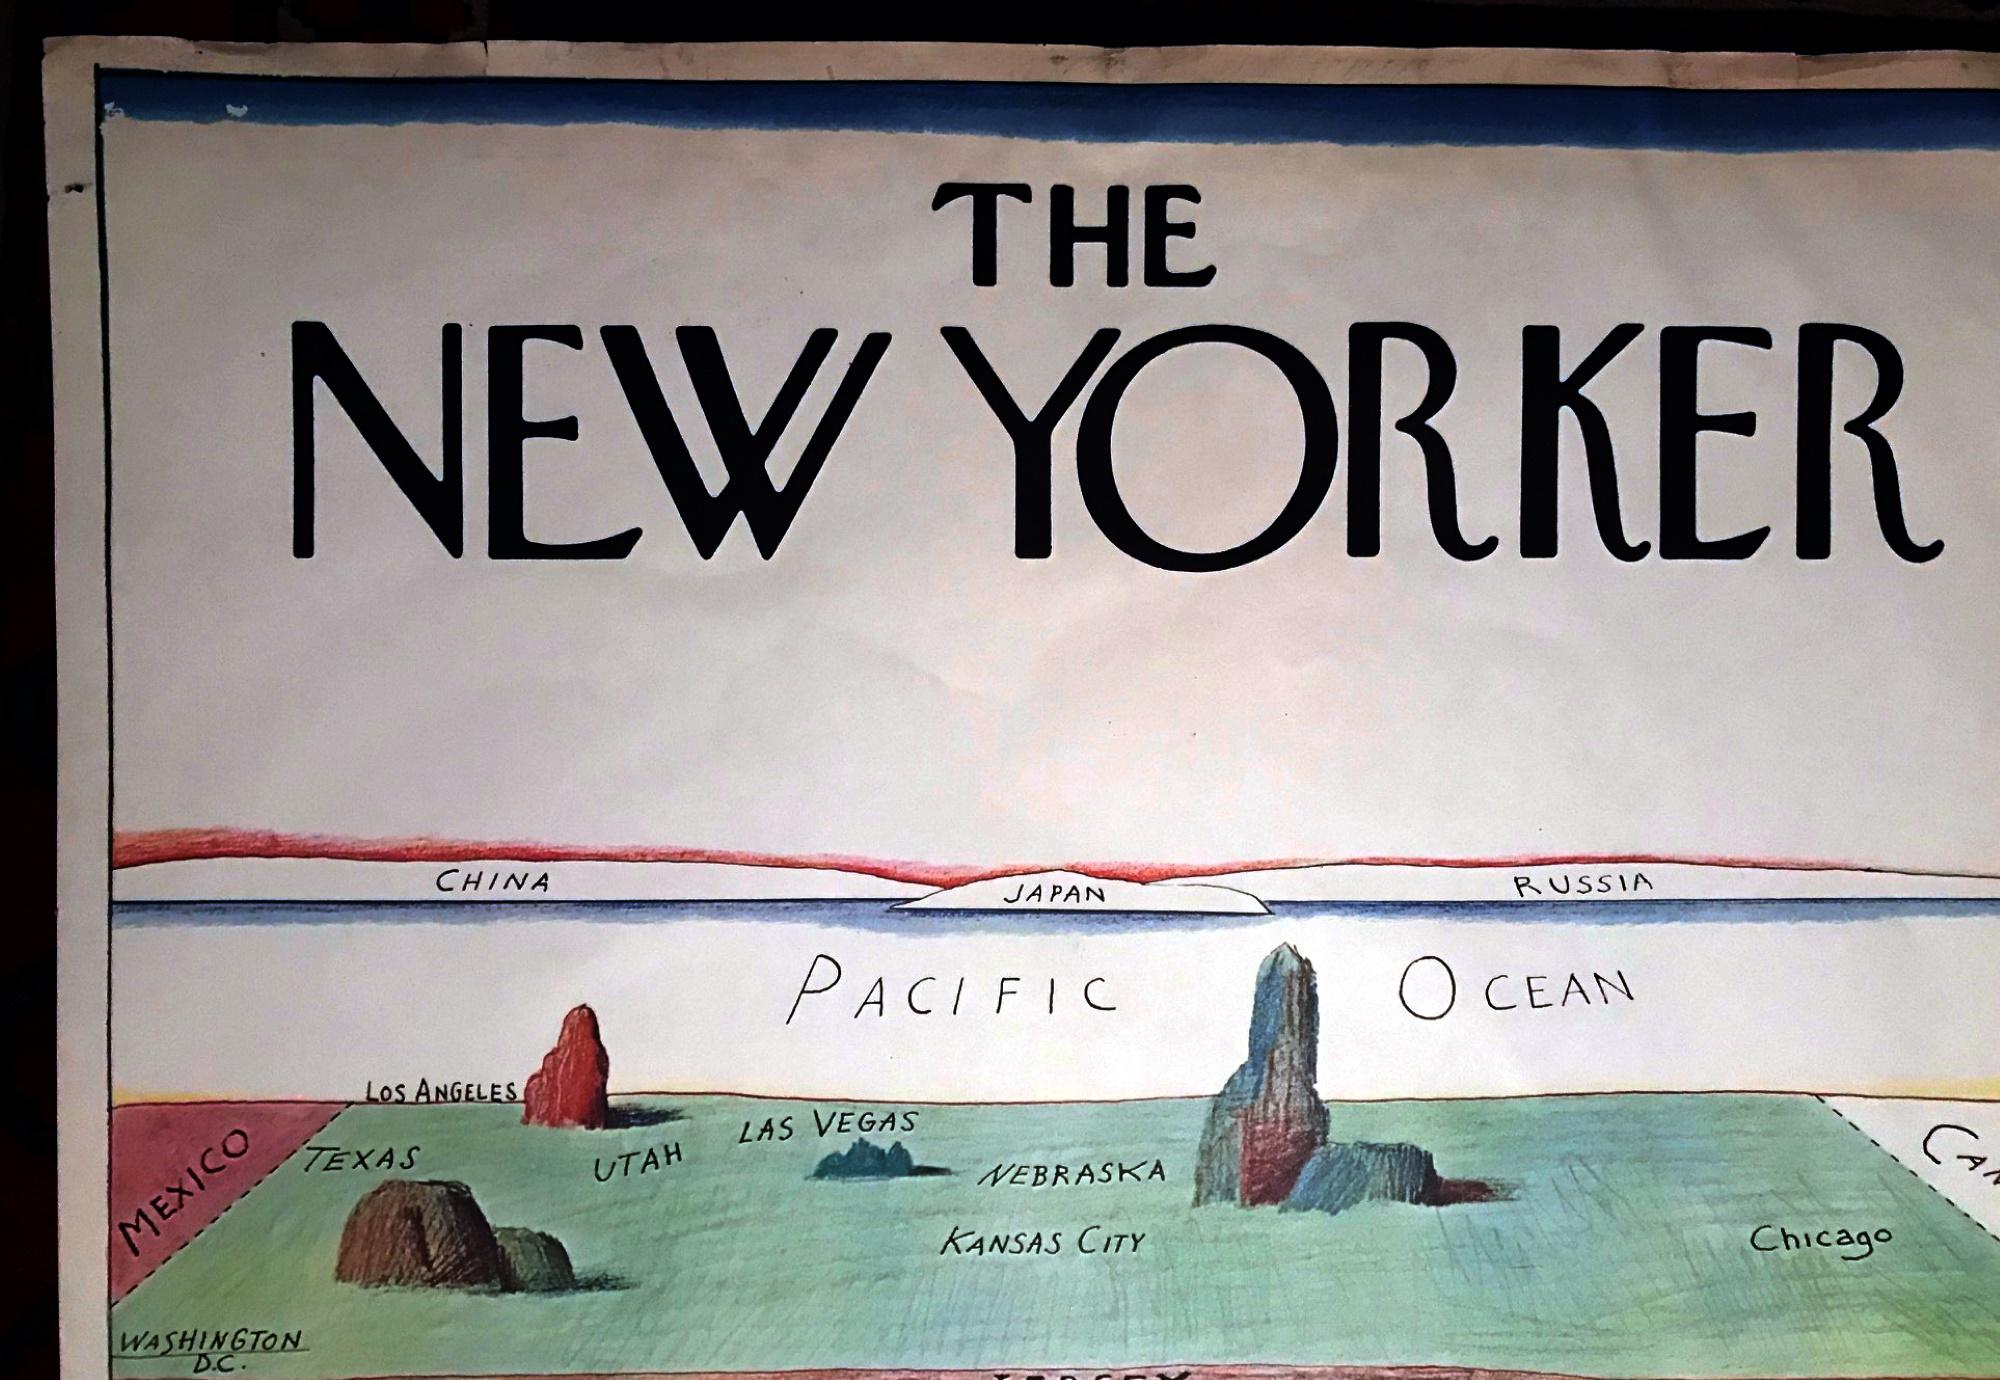 Original 1976 The New Yorker Magazine Poster by Saul Steinberg, Romanian-American (1914-1999)

An amazing, original 1976 advertising poster, “The New Yorker”. “The World as Seen From 9th Avenue” by Saul Steinberg. Limited edition of 10,000 offset